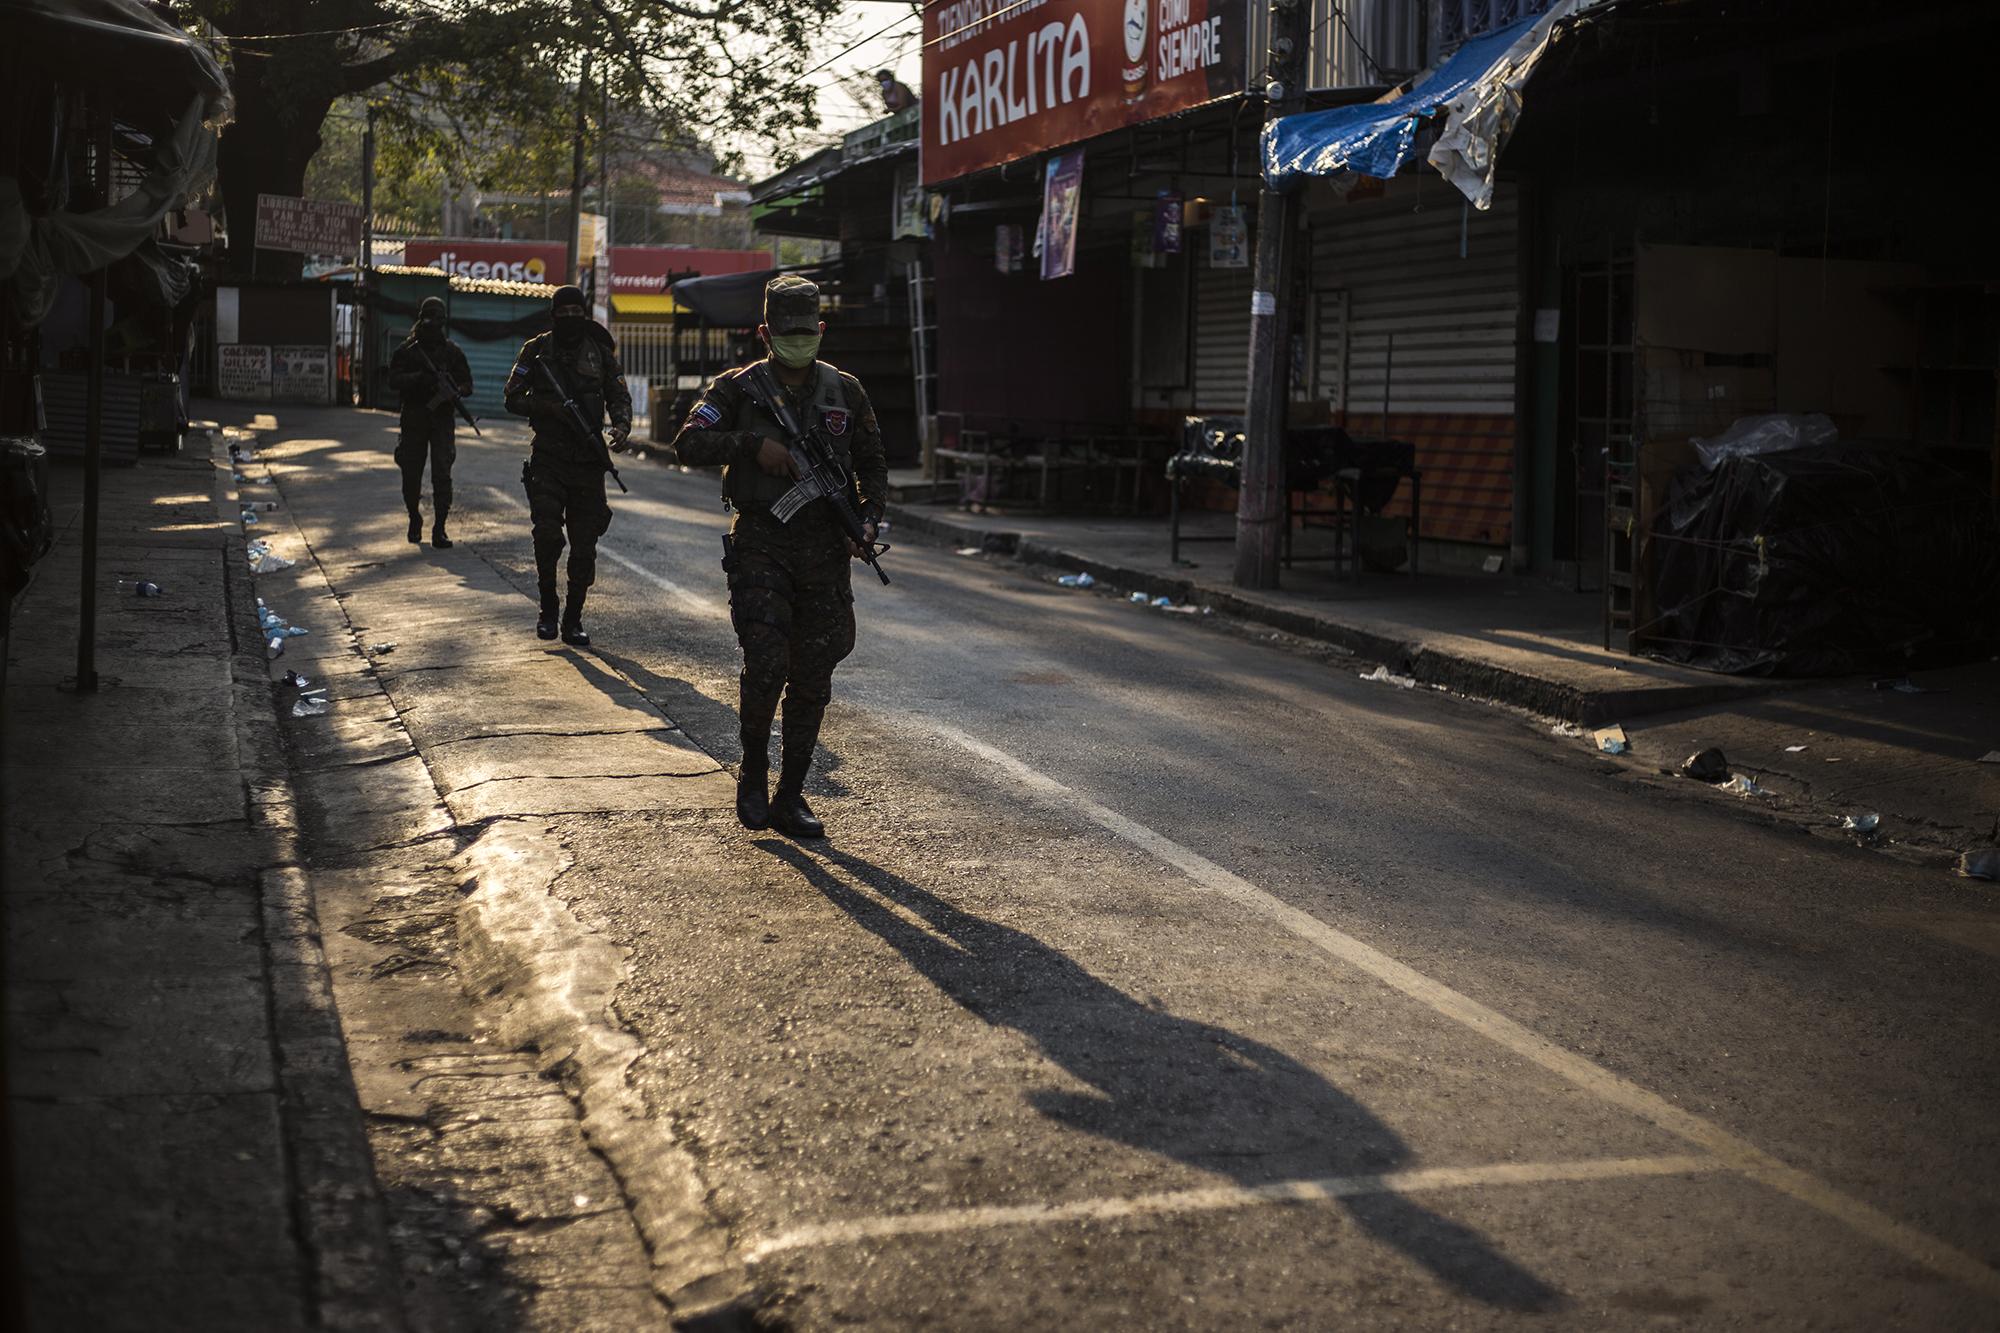 The armed forces took to the streets of La Libertad, home to over 35 thousand people, stationing at least two soldiers on every corner. In this image, a team patrols the town marketplace in the early hours of Saturday, April 18.